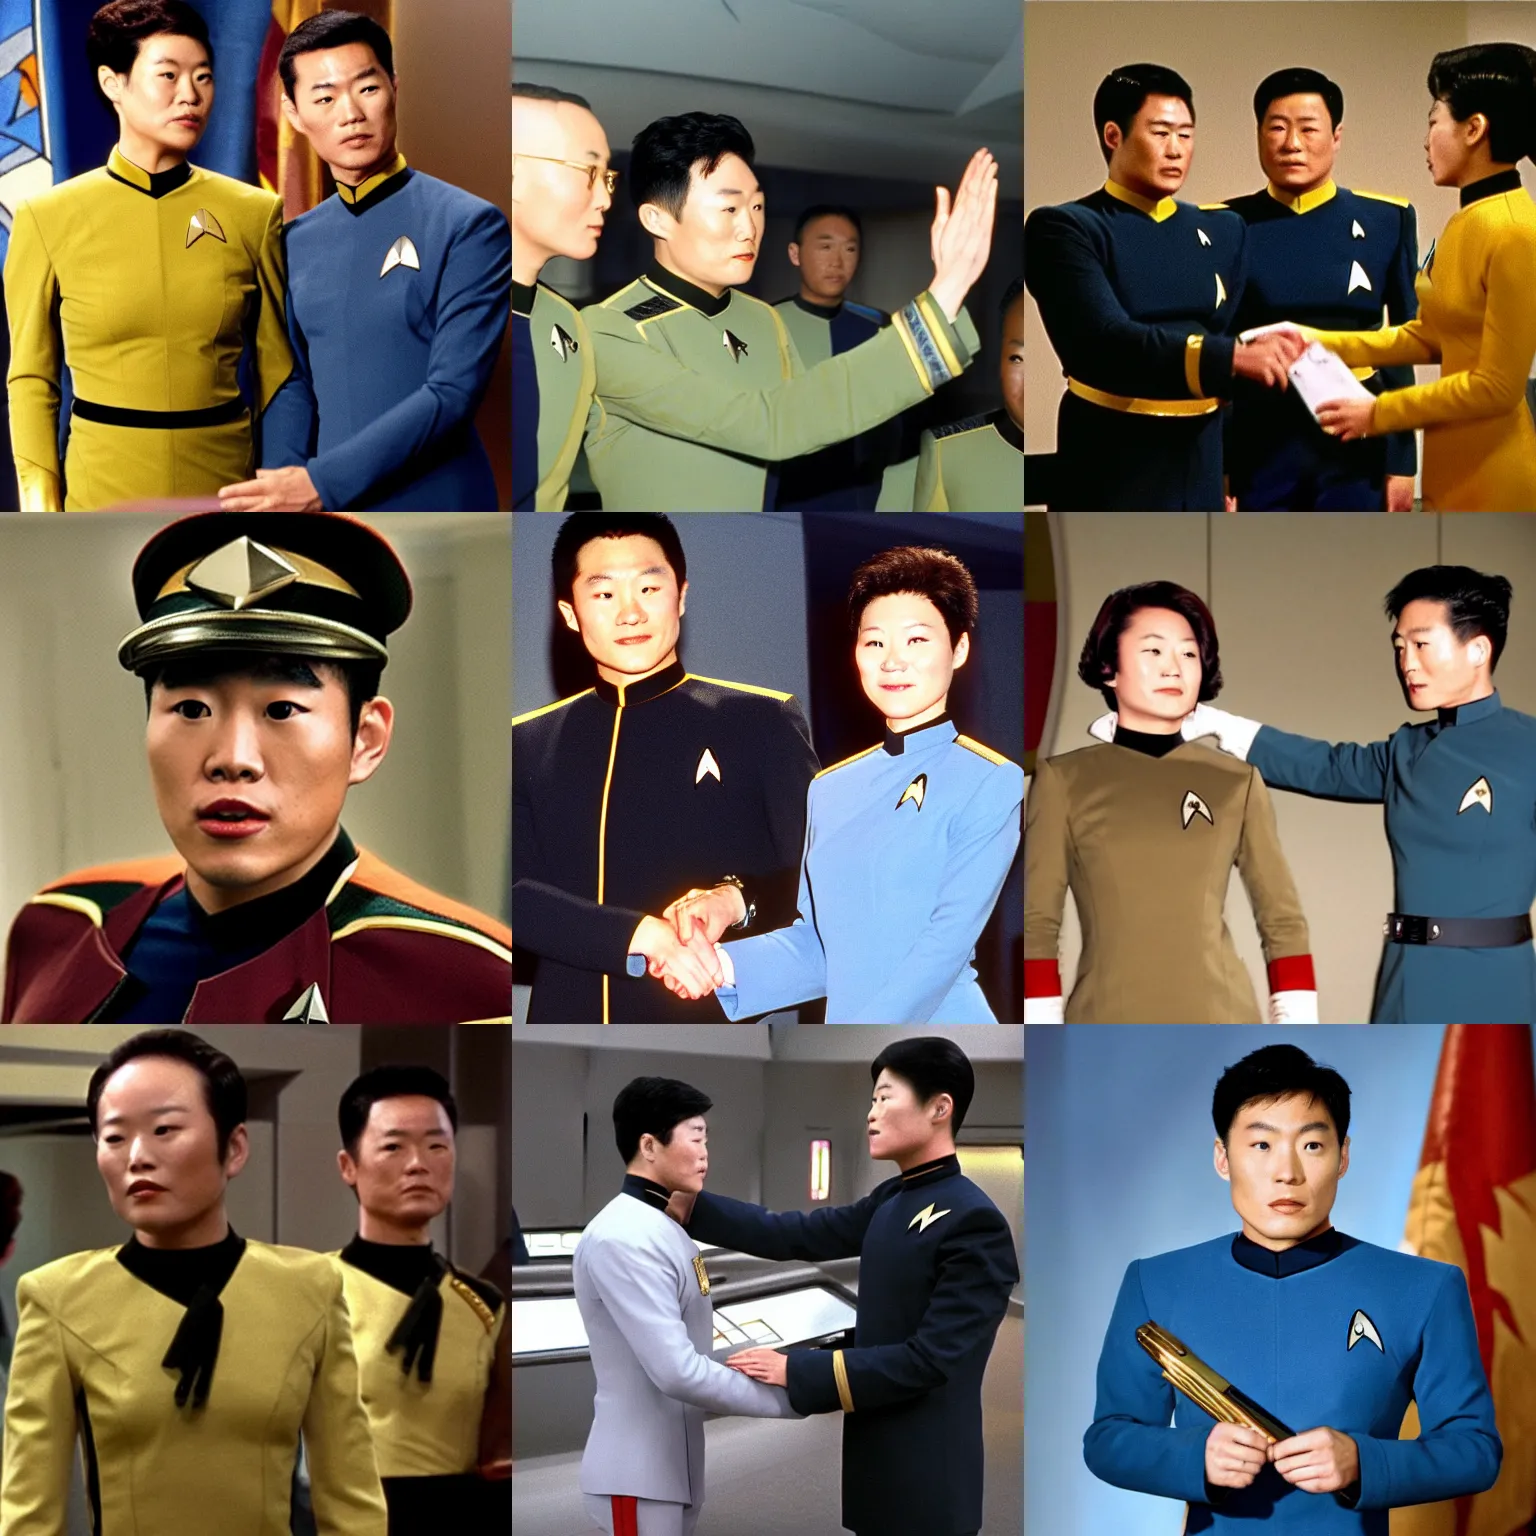 Prompt: A picture of Ensign Harry Kim from Star Trek Voyager getting promoted to a Starfleet admiral, award winning photography